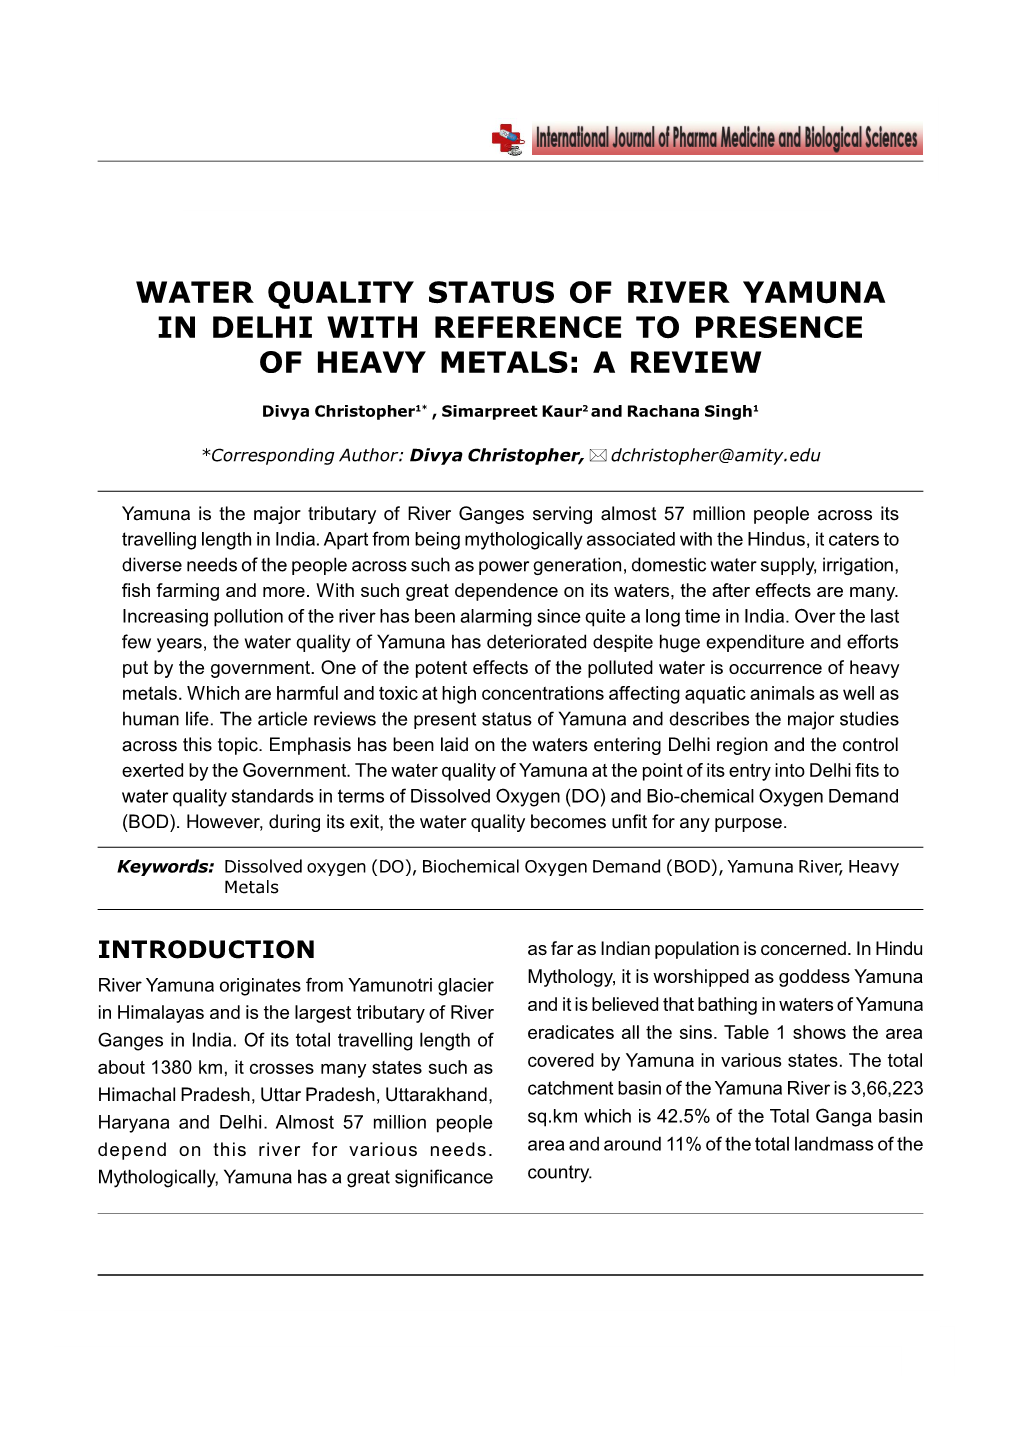 Water Quality Status of River Yamuna in Delhi with Reference to Presence of Heavy Metals: a Review